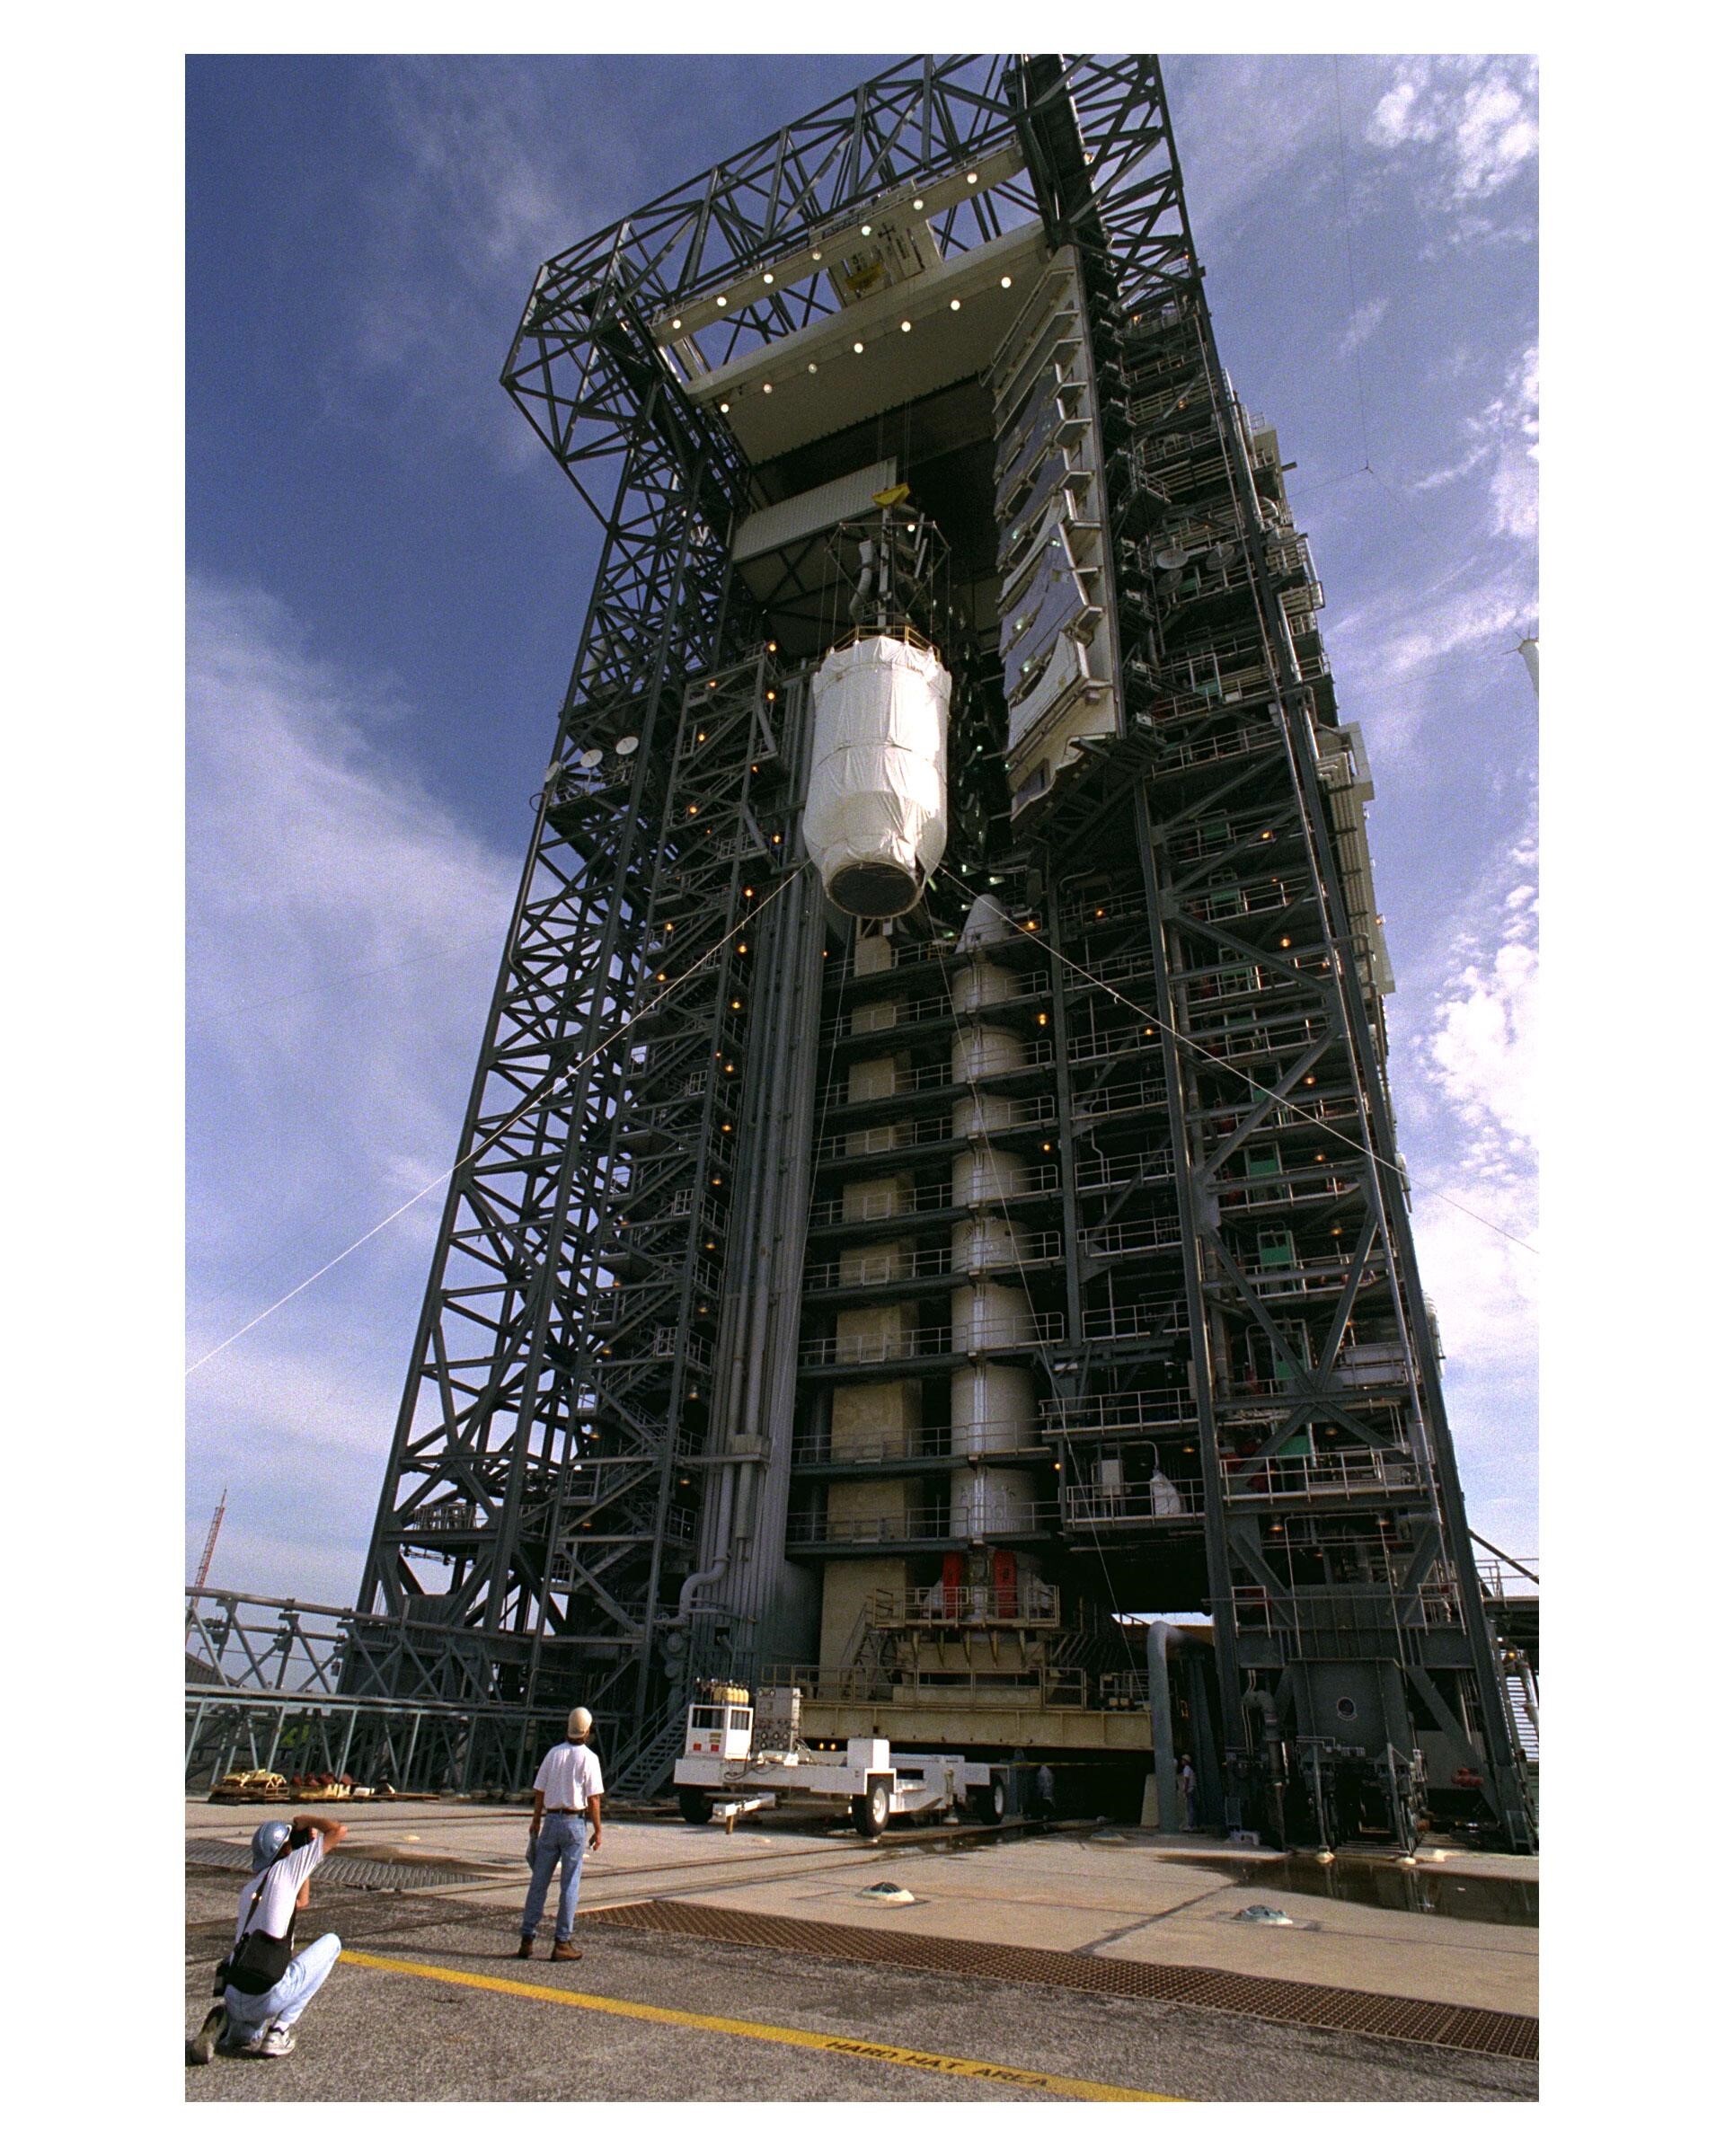 Color image of rocket upper stage being lifted atop rocket.